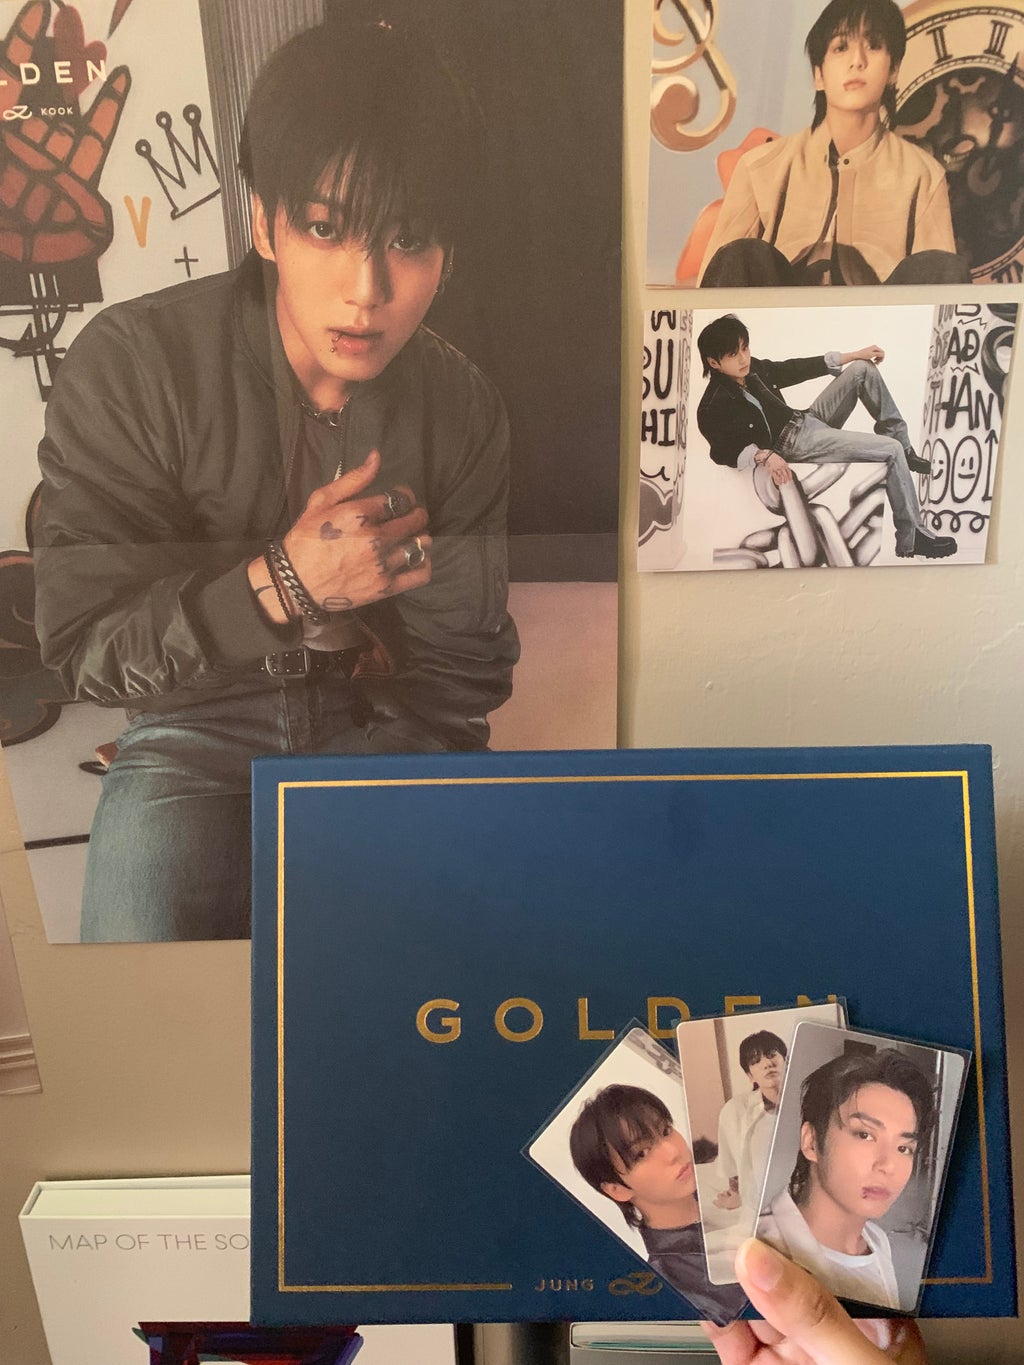 Jeon Jungkook’s Solo Album “Golden” with posters, postcards, and 3 photo cards all from the album